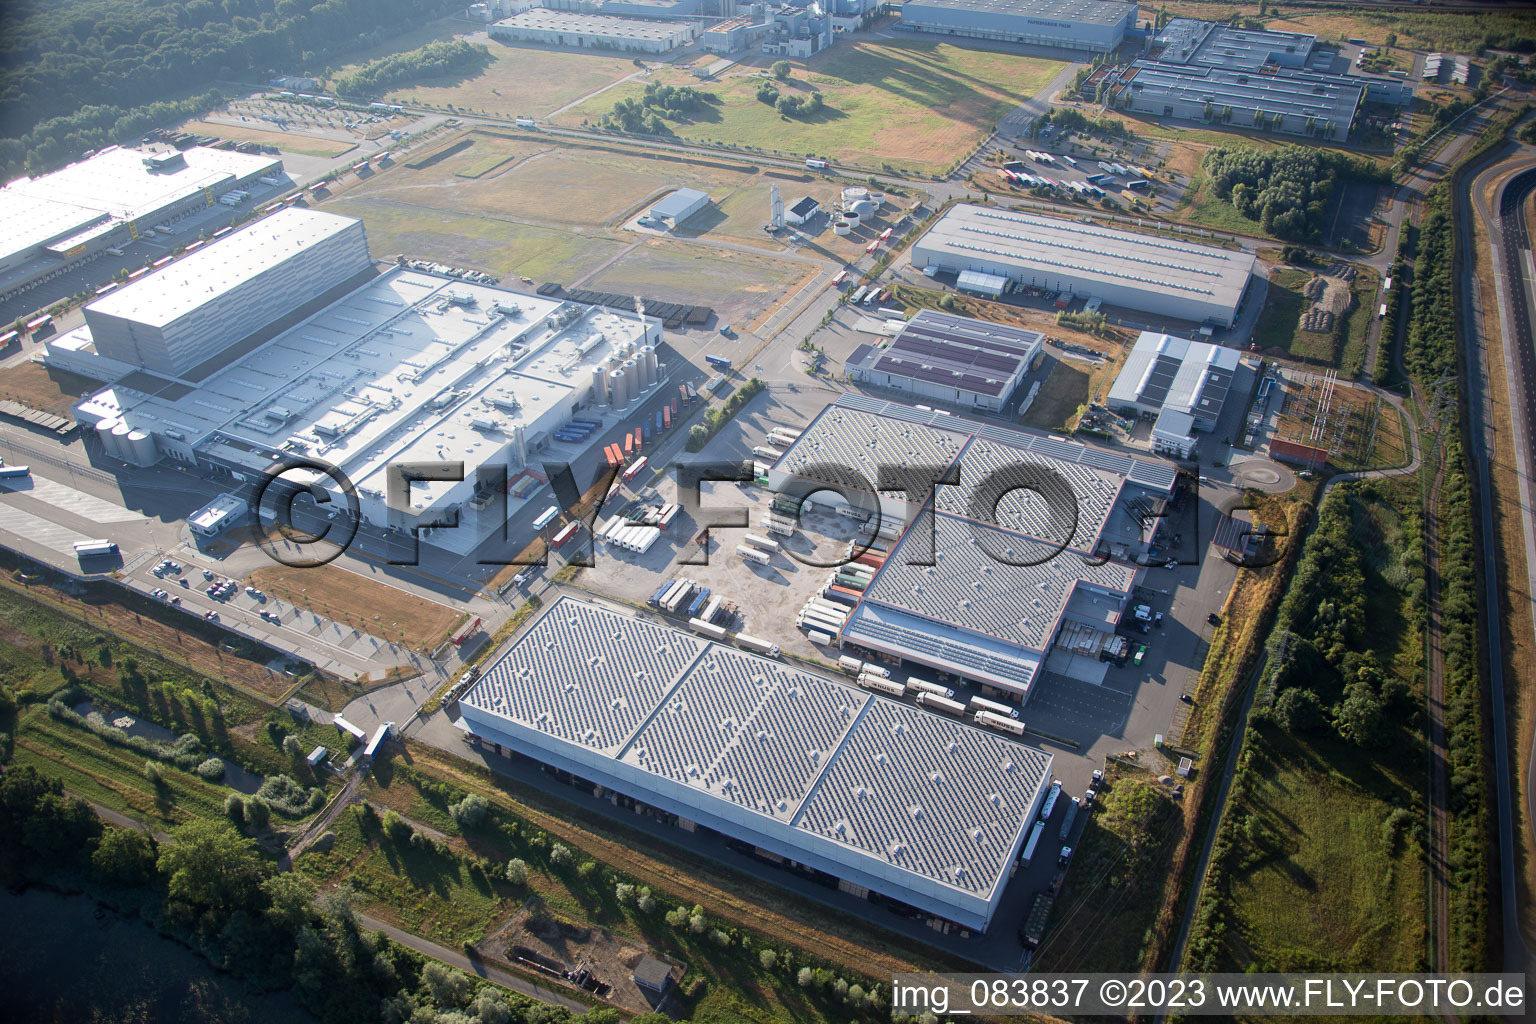 Oberwald industrial area in Wörth am Rhein in the state Rhineland-Palatinate, Germany seen from a drone